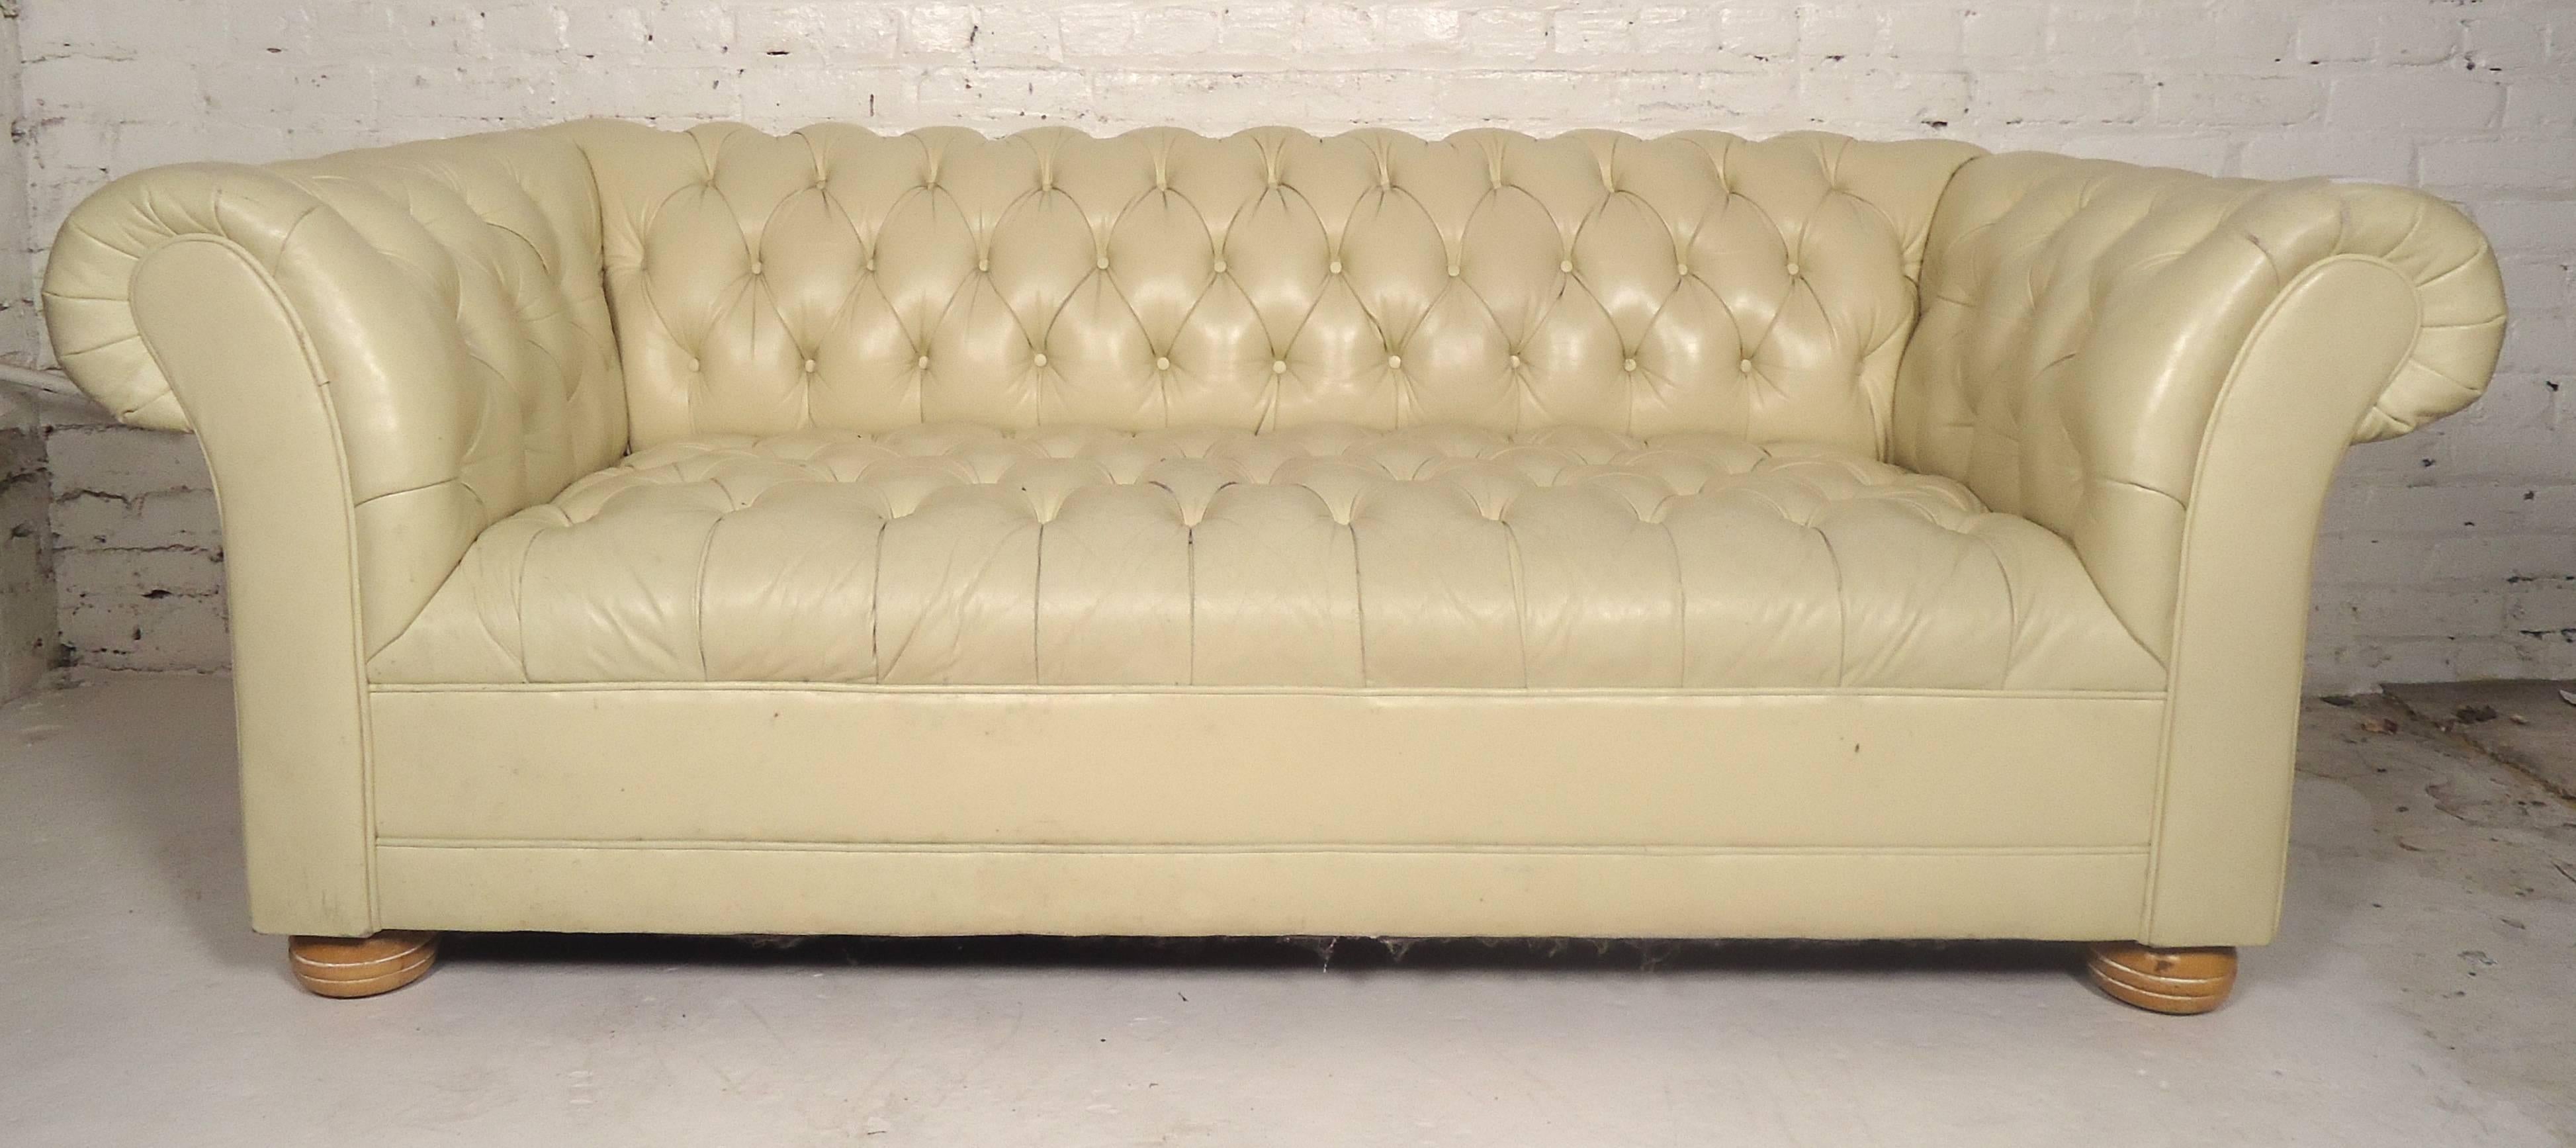 Vintage off-white tufted sofa in soft leather. Classic Chesterfield style with large rolling arms and wooded feet.

(Please confirm item location - NY or NJ - with dealer).
  